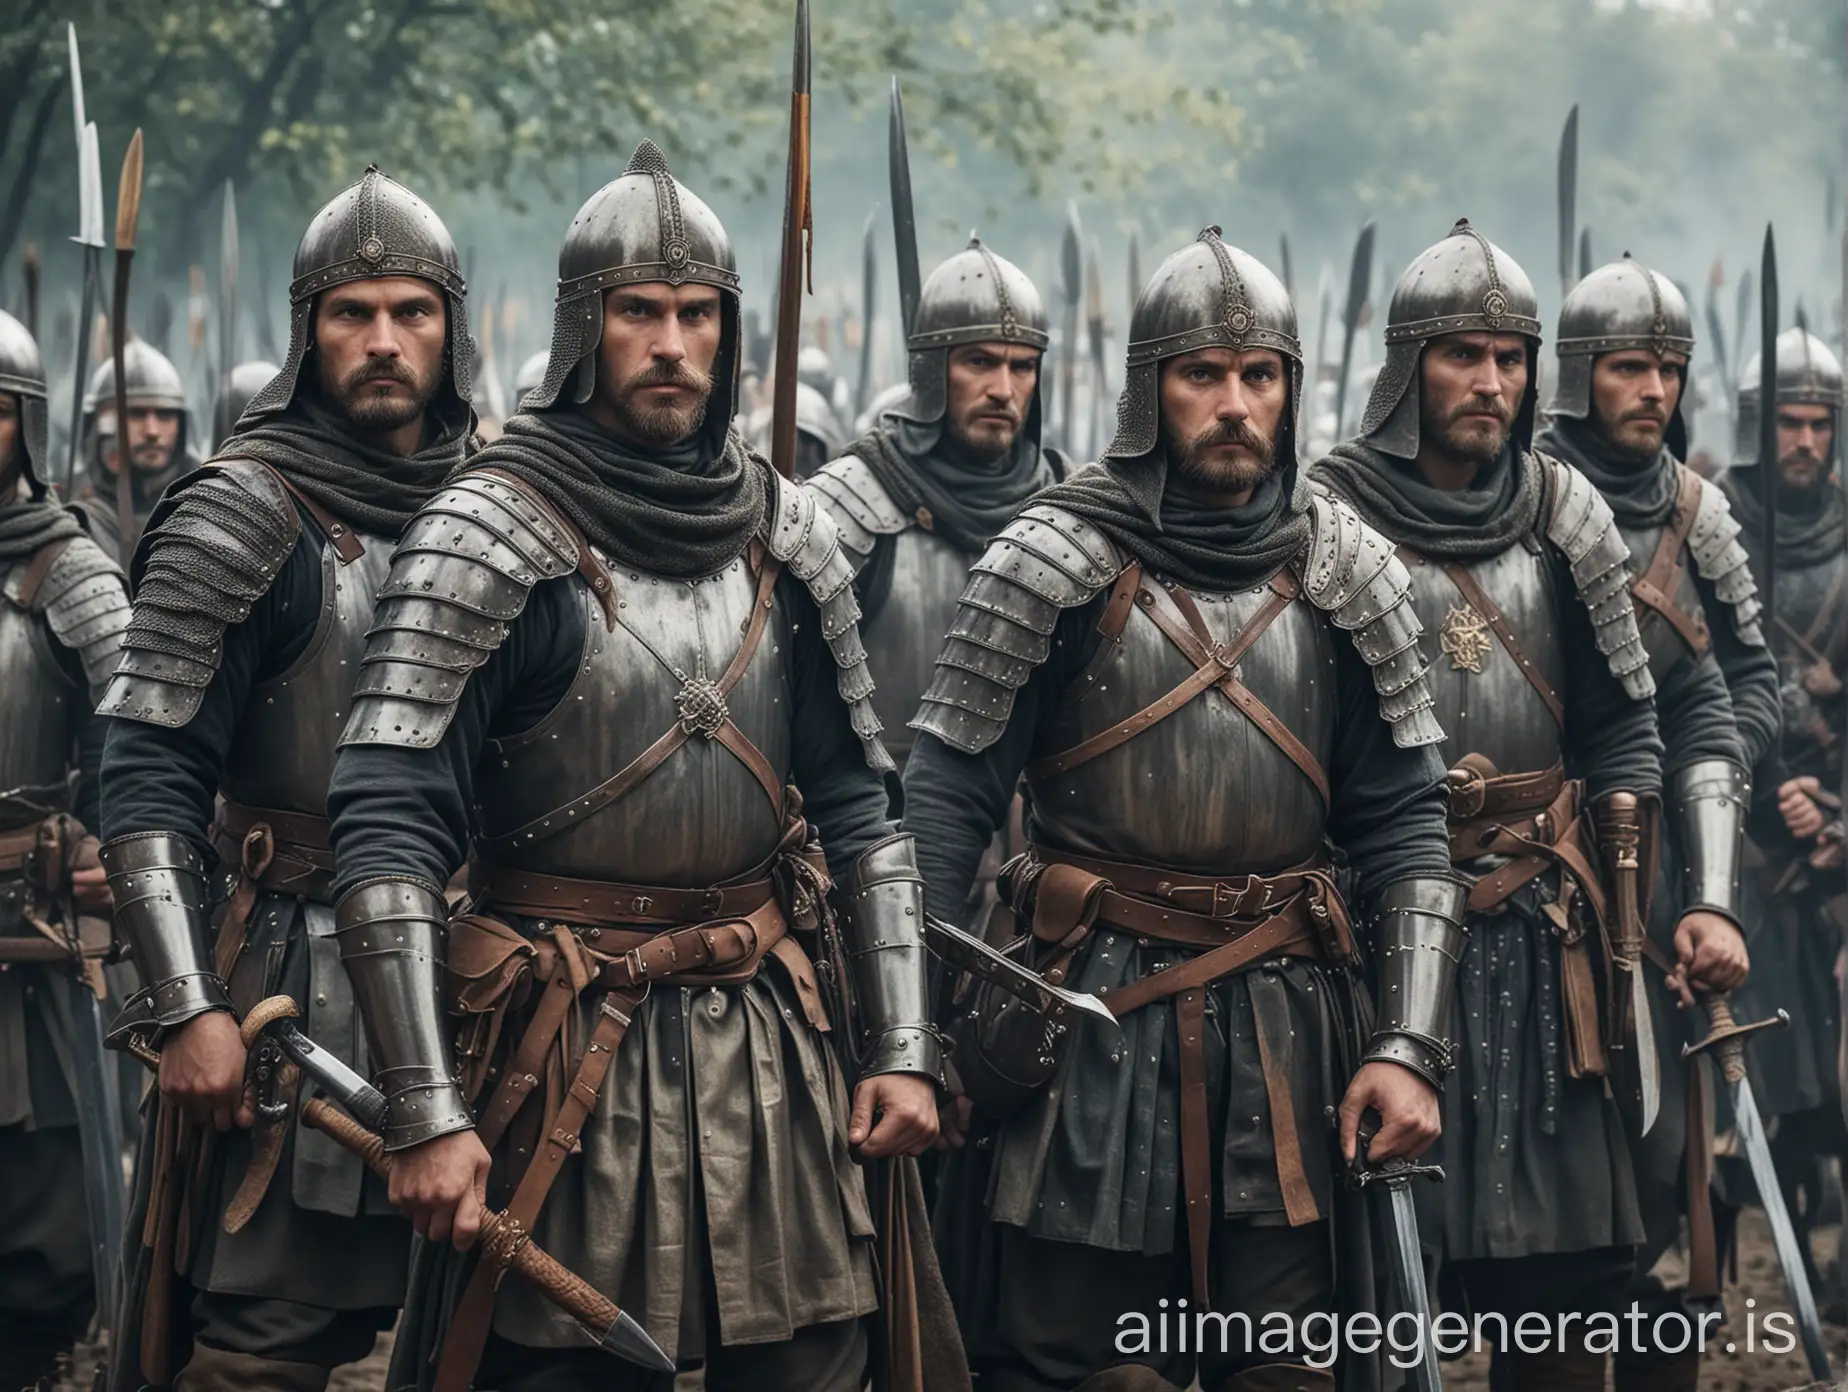 medieval soldiers from eastern europe in full gear with swords and spears